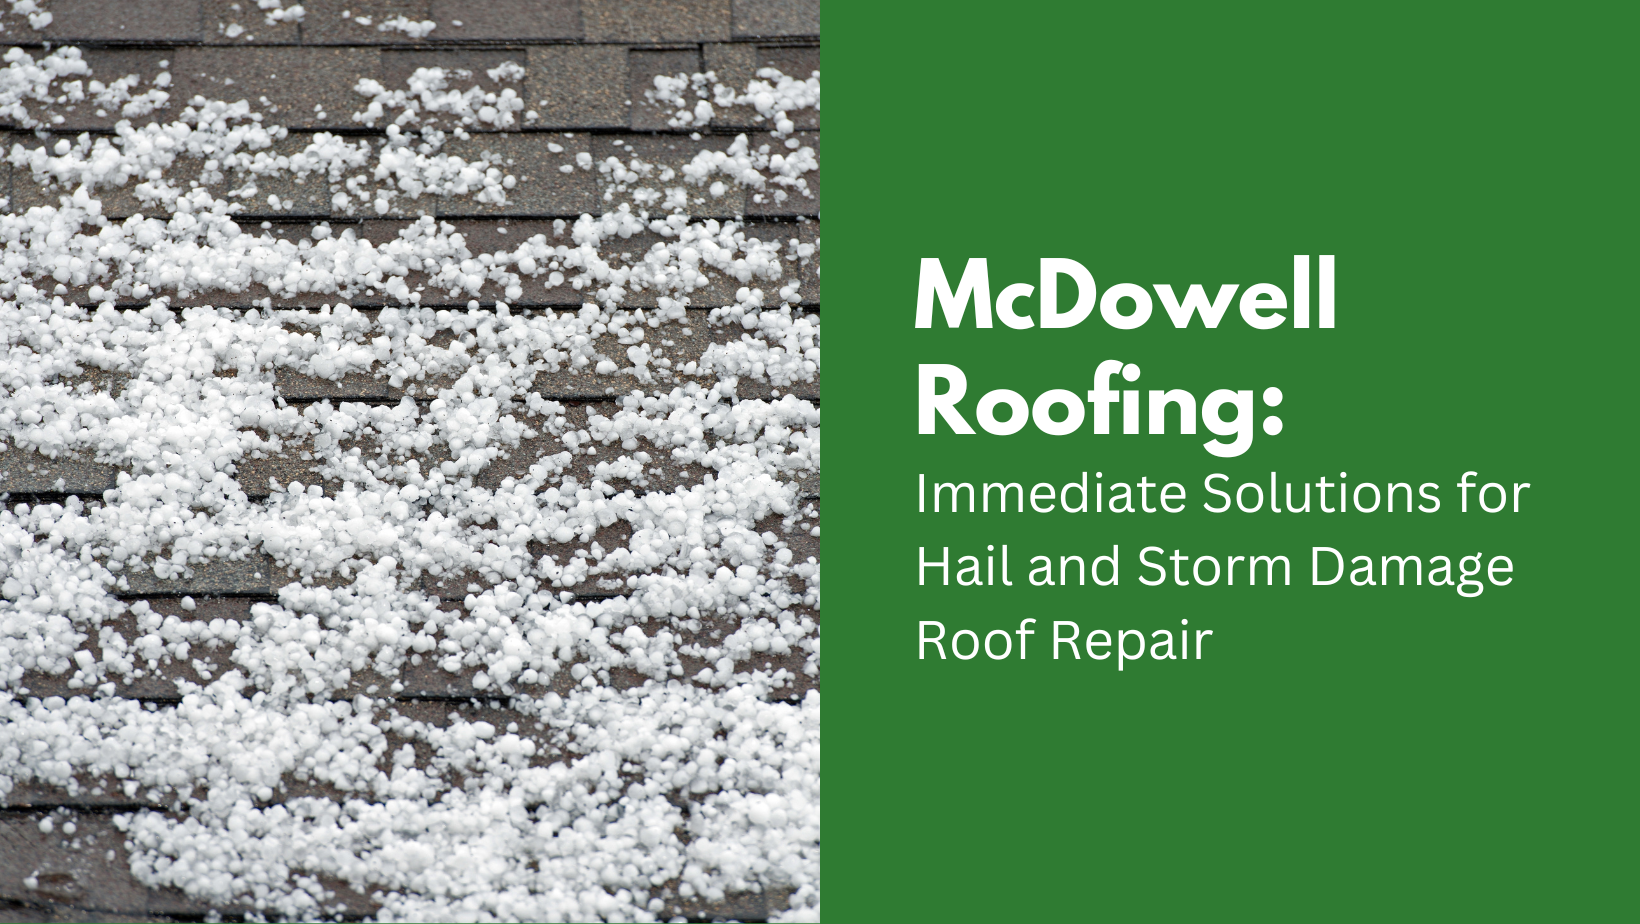 McDowell Roofing: Immediate Solutions for Hail and Storm Damage Roof Repair